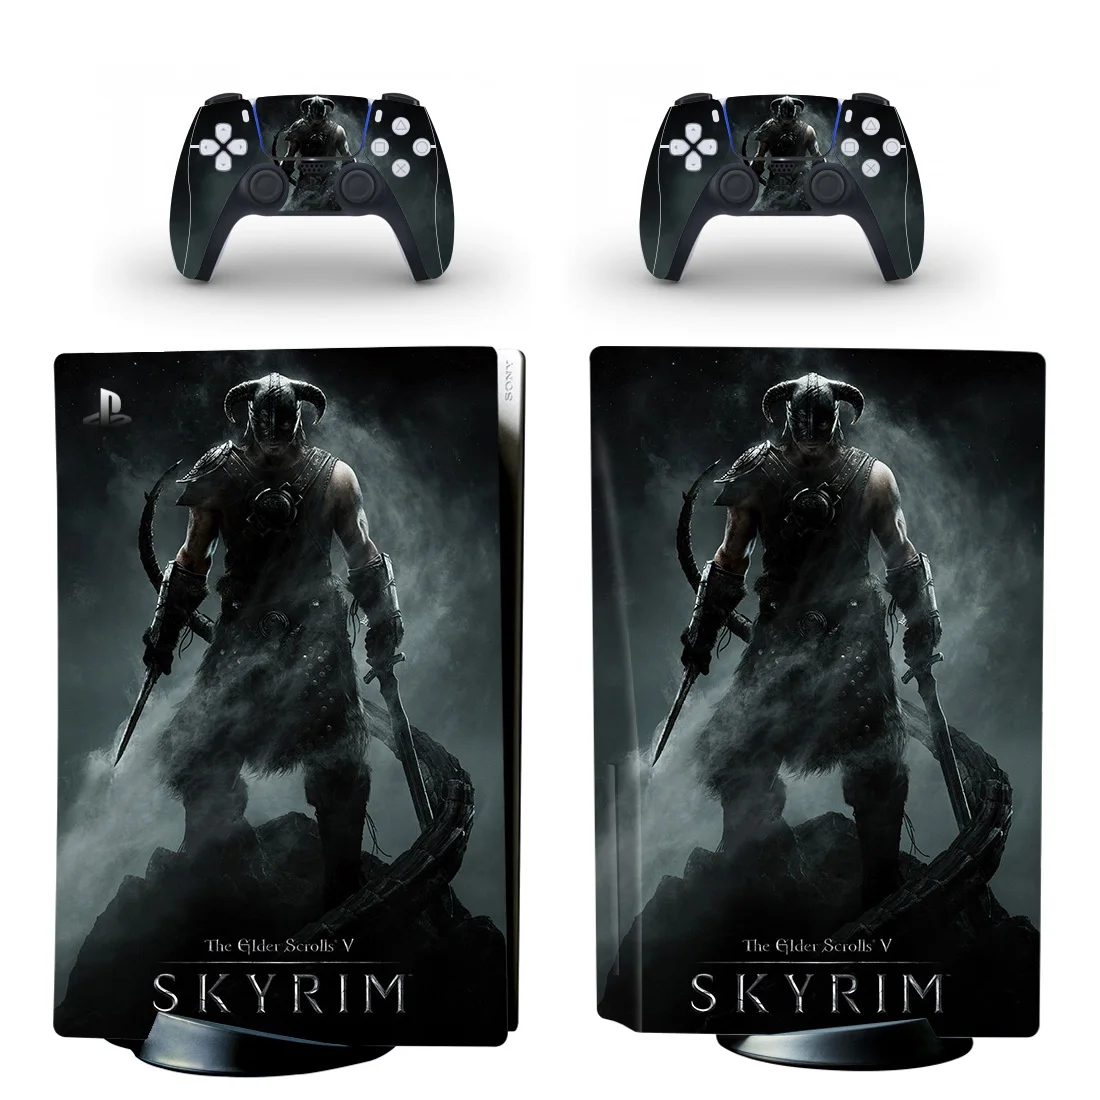 The Elder Scrolls V Skyrim PS5 Disc Skin Sticker for Playstation 5 Console & 2 Controllers Decal Vinyl Protective Disk Skins 1